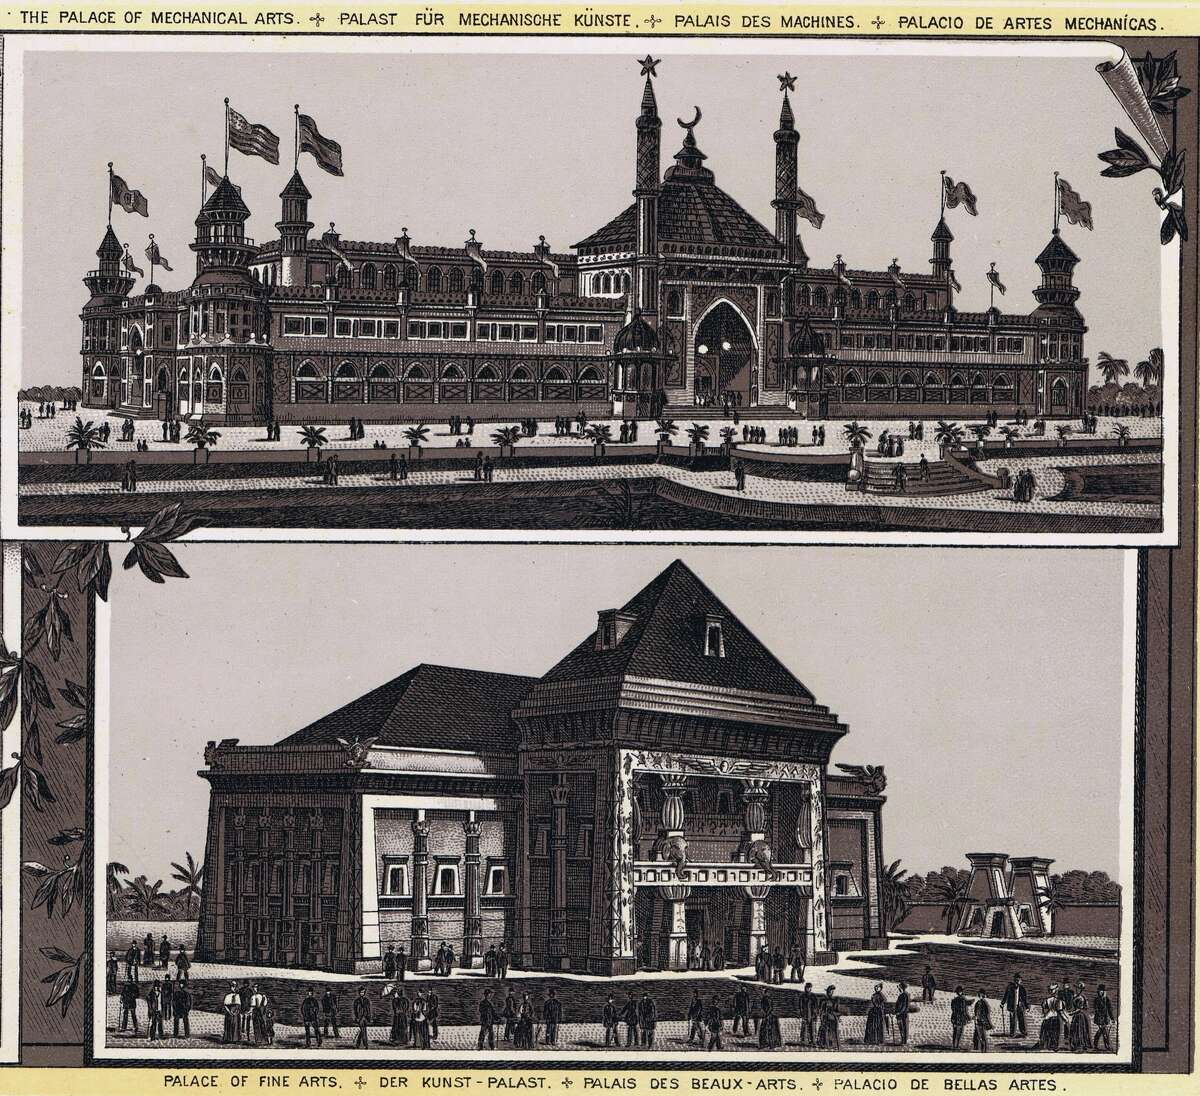 Palace of Mechanical Arts and the Palace of Fine Arts at the Midwinter Fair in Golden Gate Park. Souvenir booklet of San Francisco in 1894. From the collection of Bob Bragman